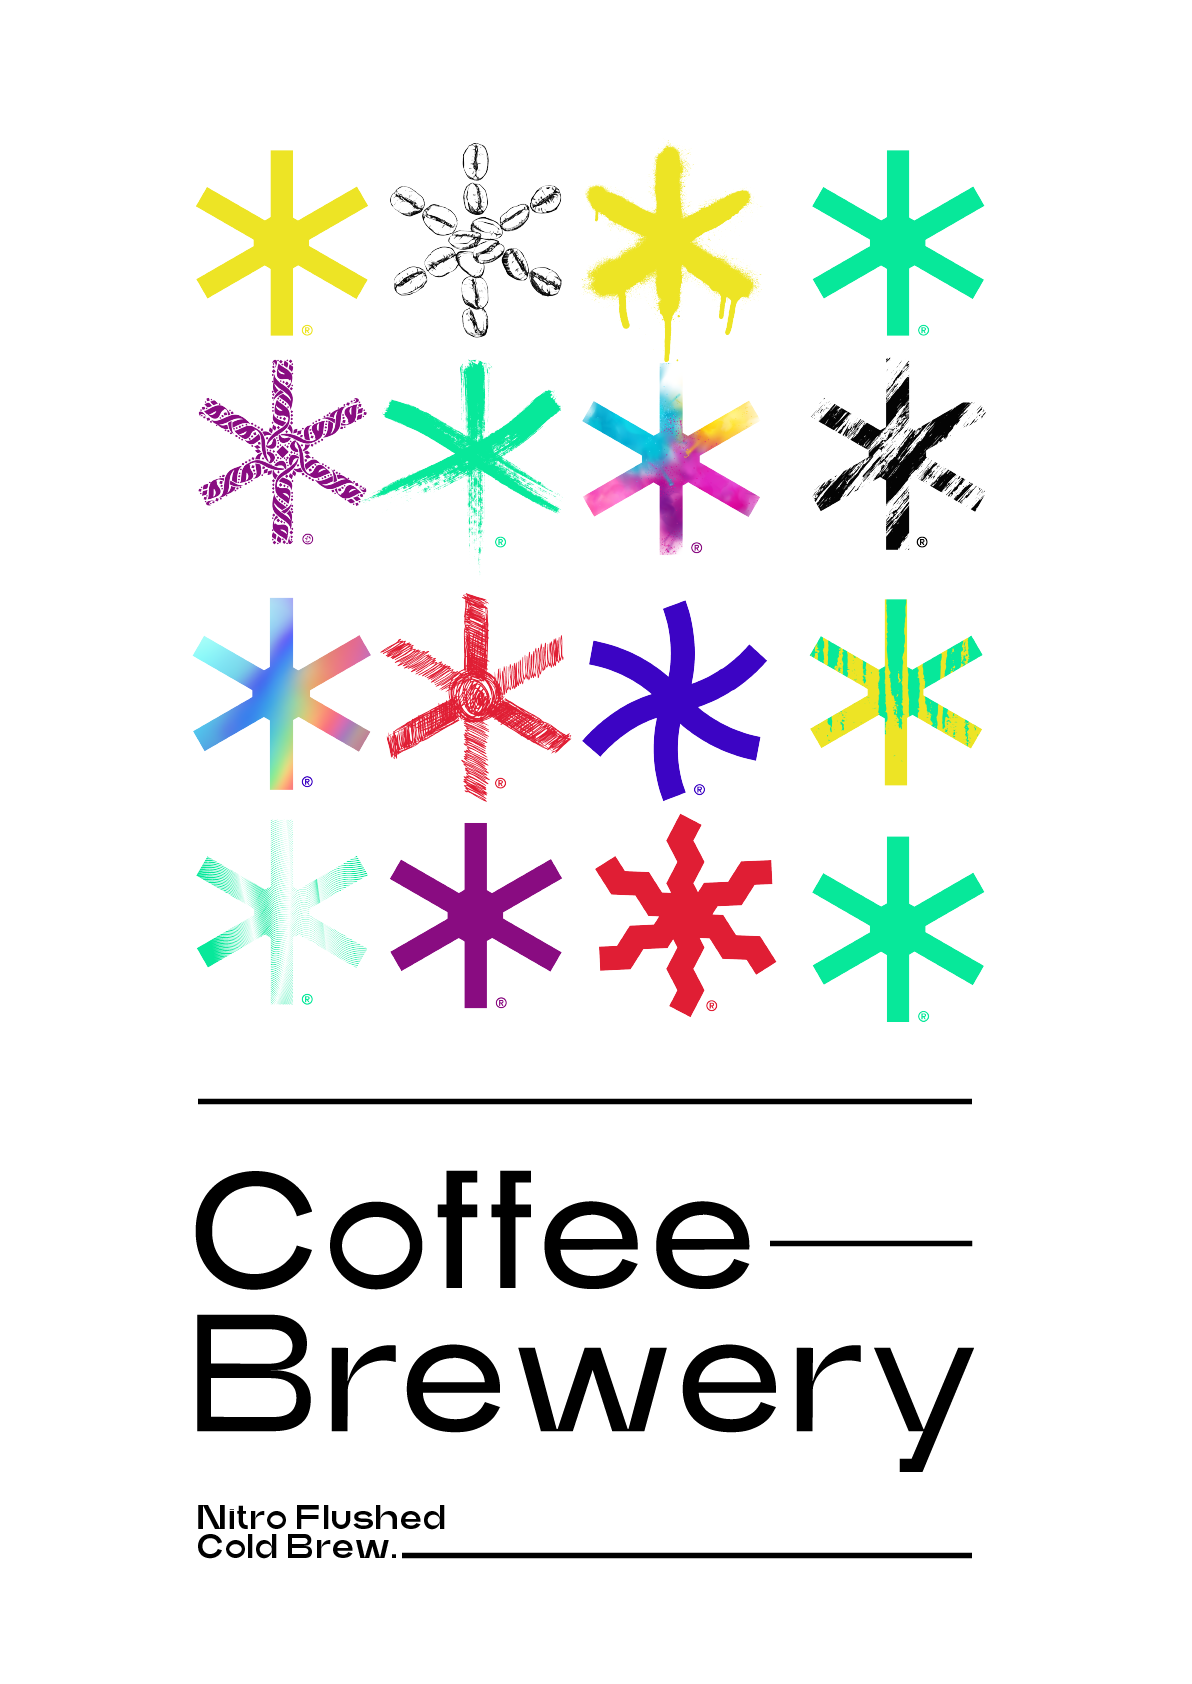 TAP Coffee Brewery on Behance975ba291907537.5e3d92d8e1703.png